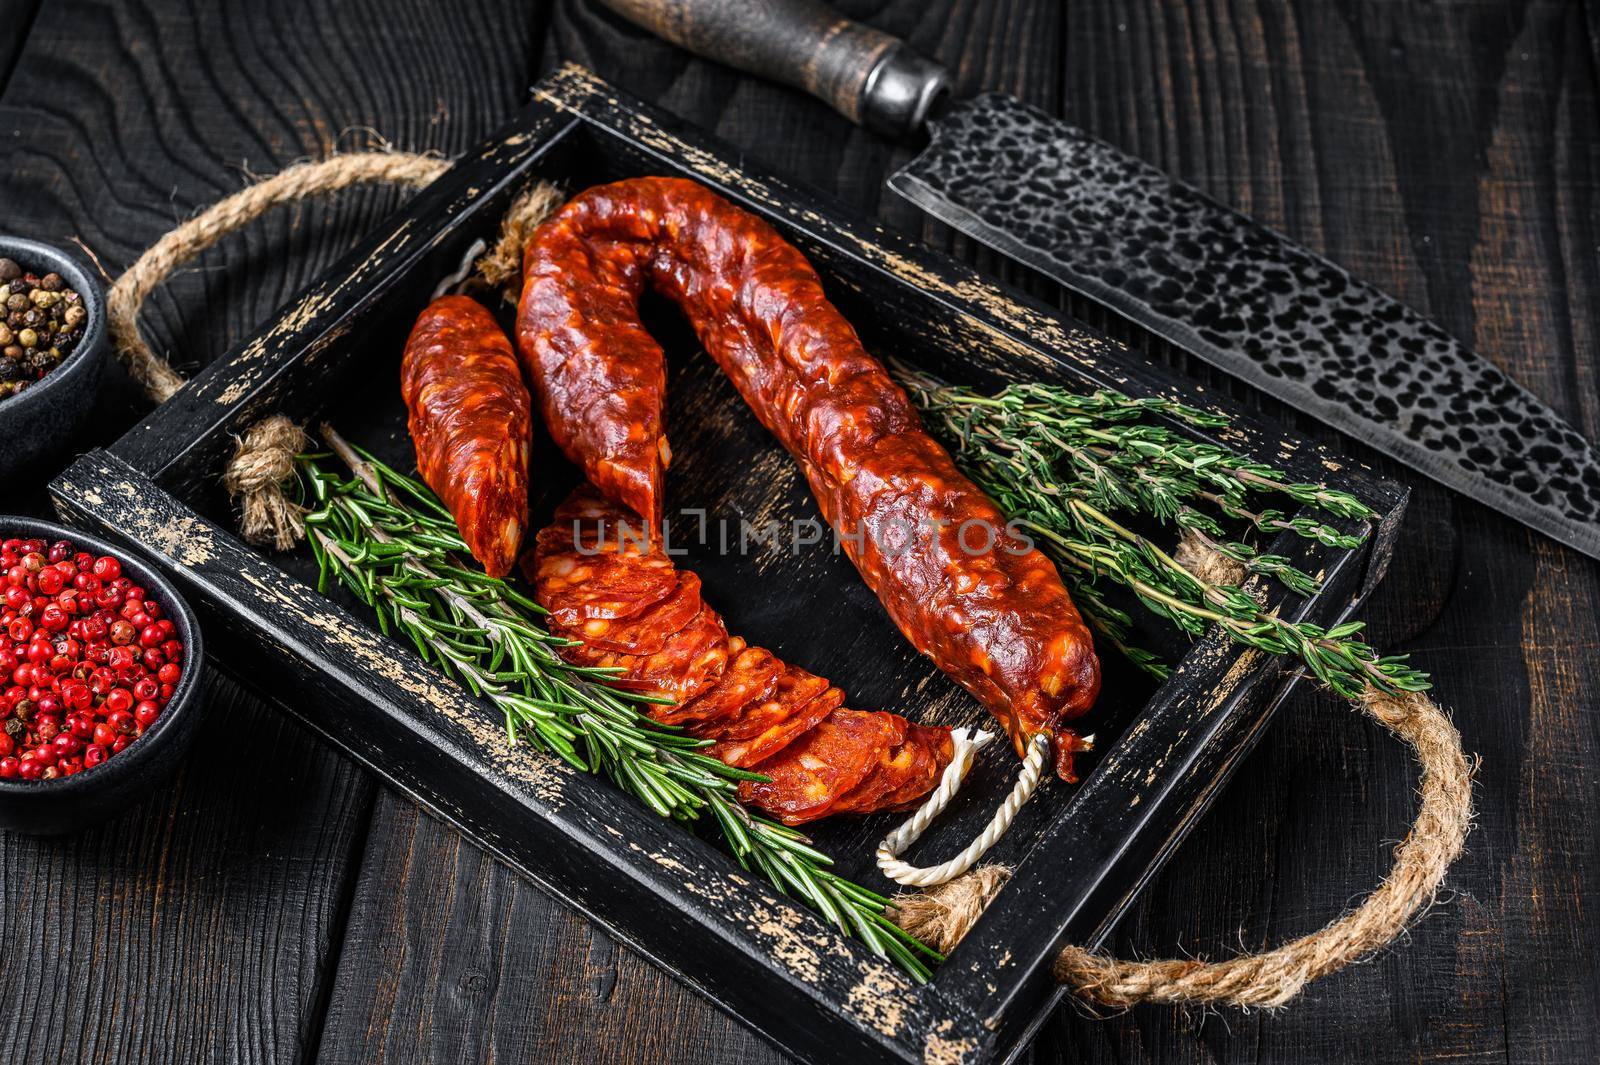 Sliced chorizo salami, Spanish traditional chorizo sausage. Black wooden background. Top view by Composter